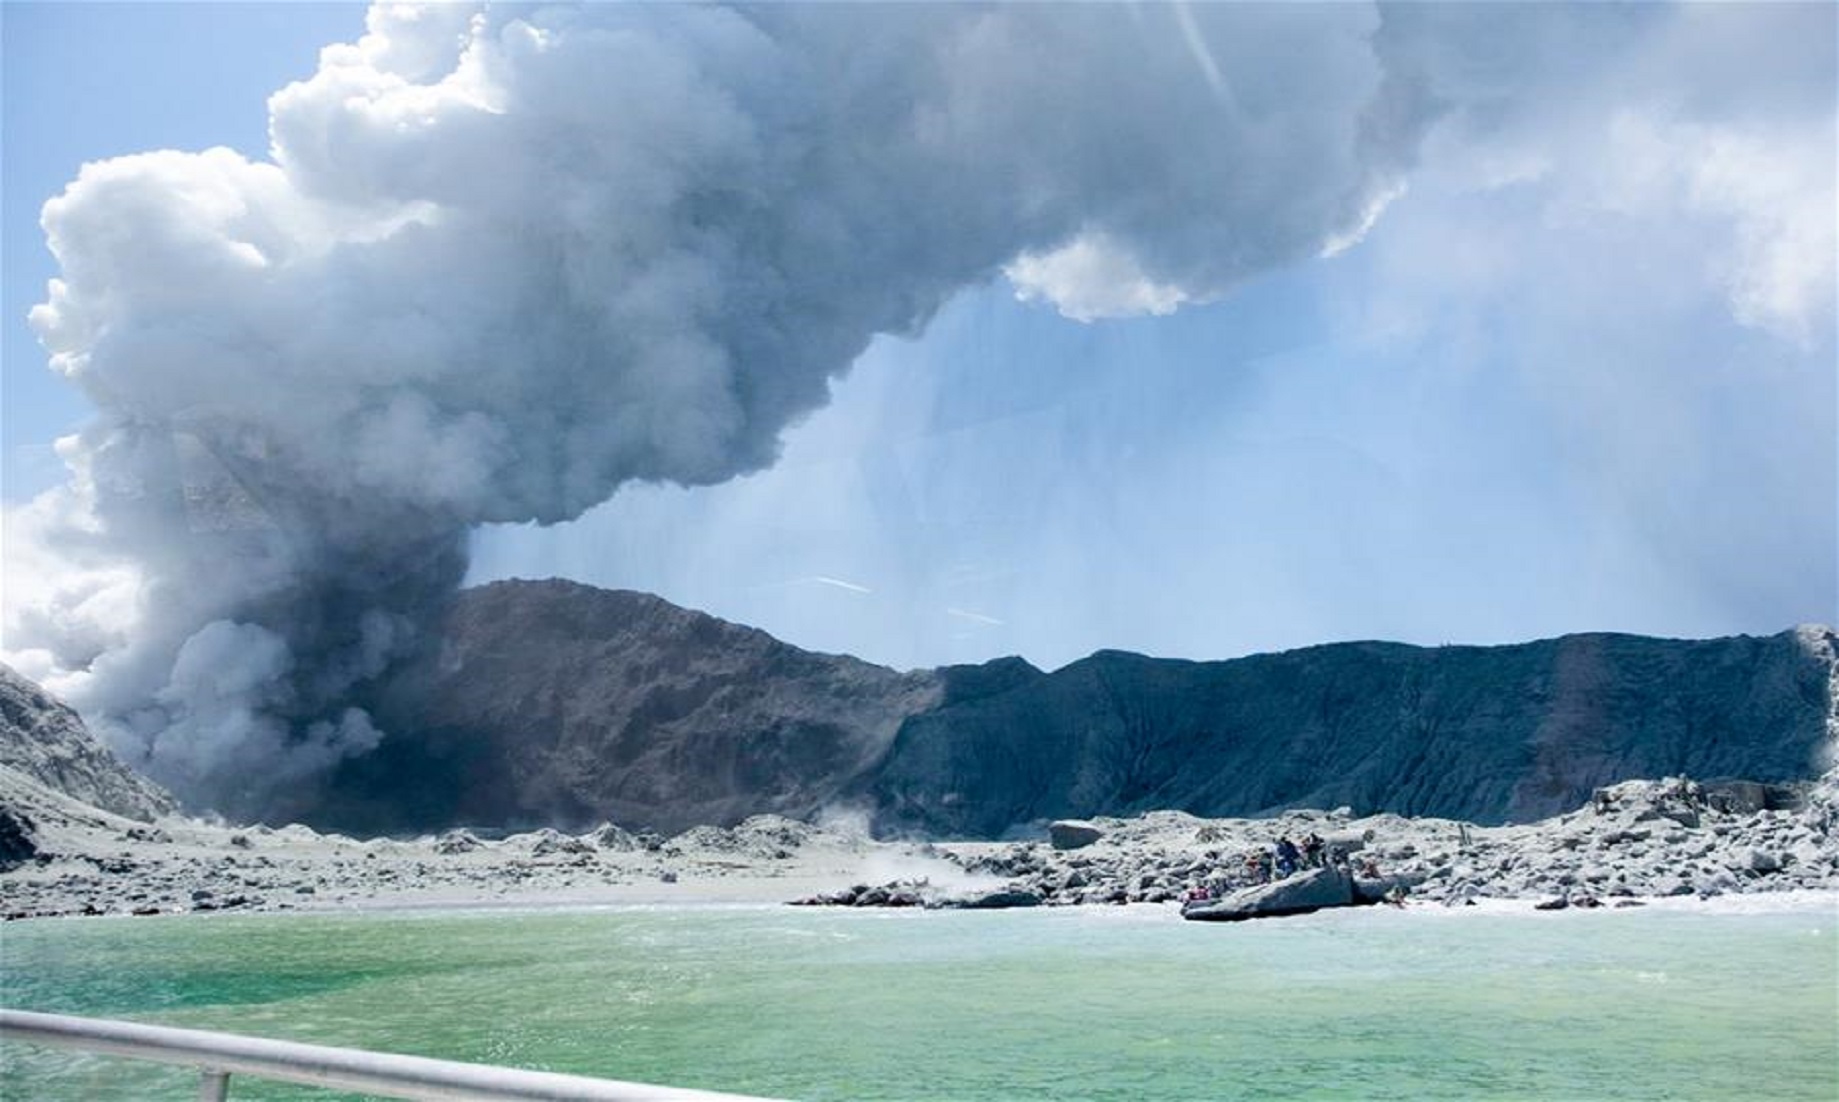 Update: No Signs Of Life After New Zealand Volcanic Eruption: PM